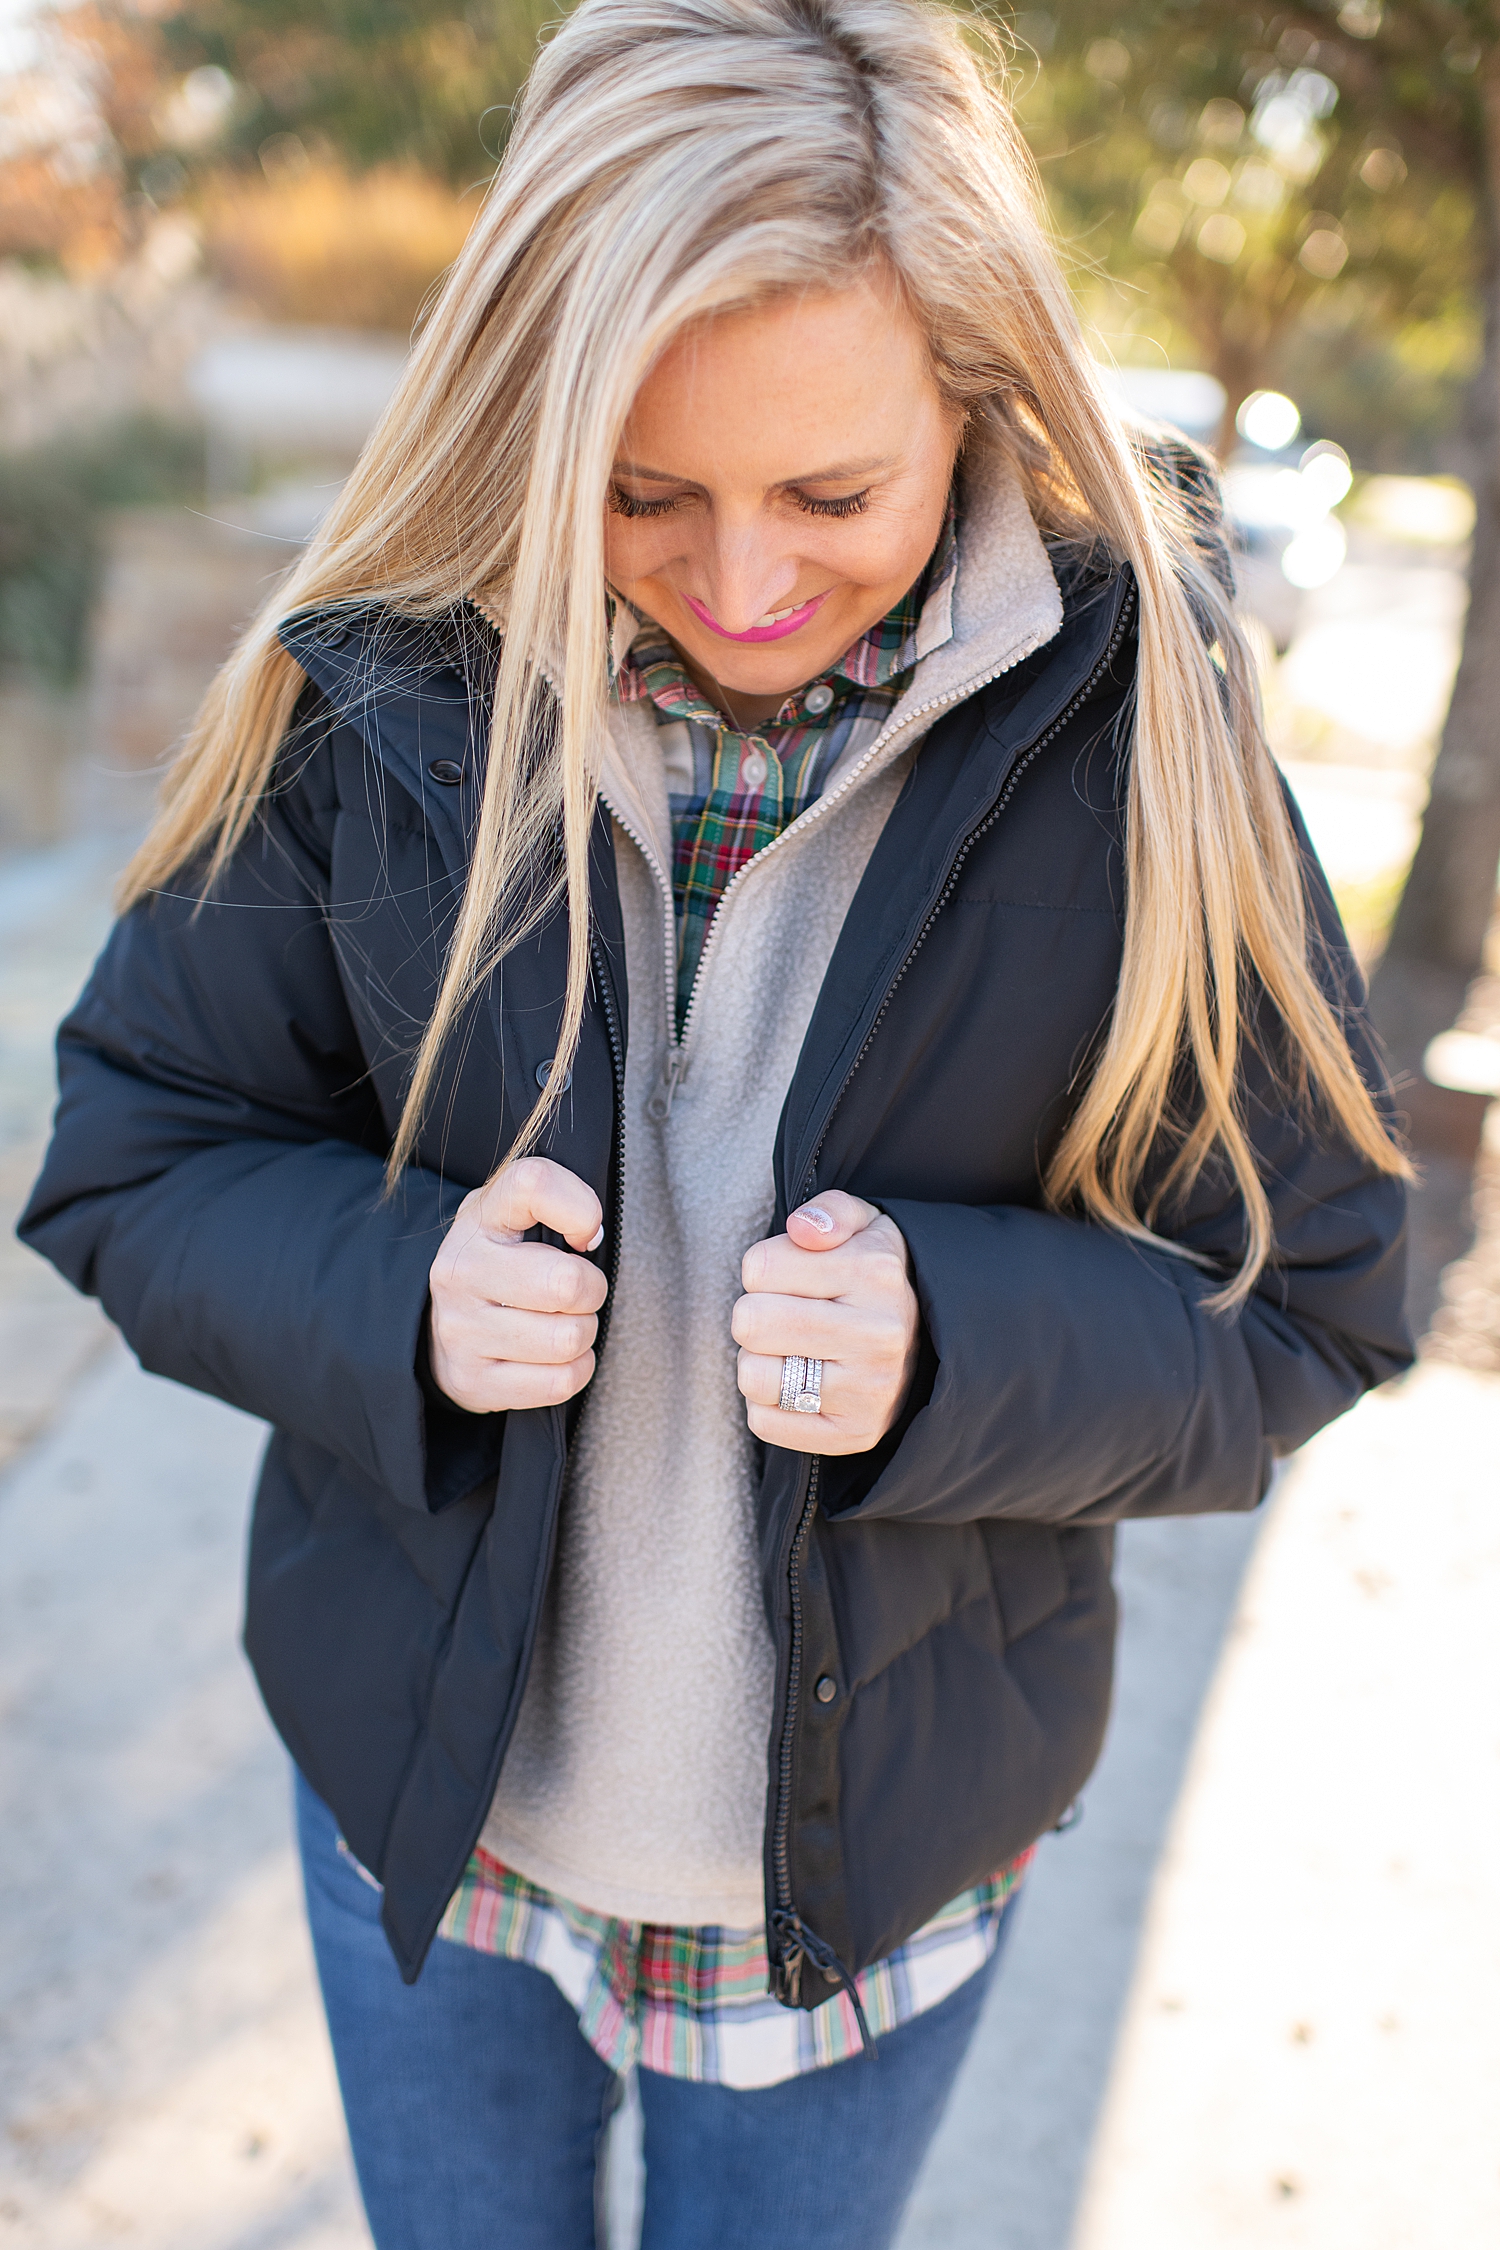 The Best Cozy Gift Ideas featured by top Houston fashion blogger, Fancy Ashley: picture of a blonde woman wearing a black Everyone puffer jacket, Everlane zip fleece, J.Crew tartan shirt, J.Crew skinny jeans and Golden Goose sneakers